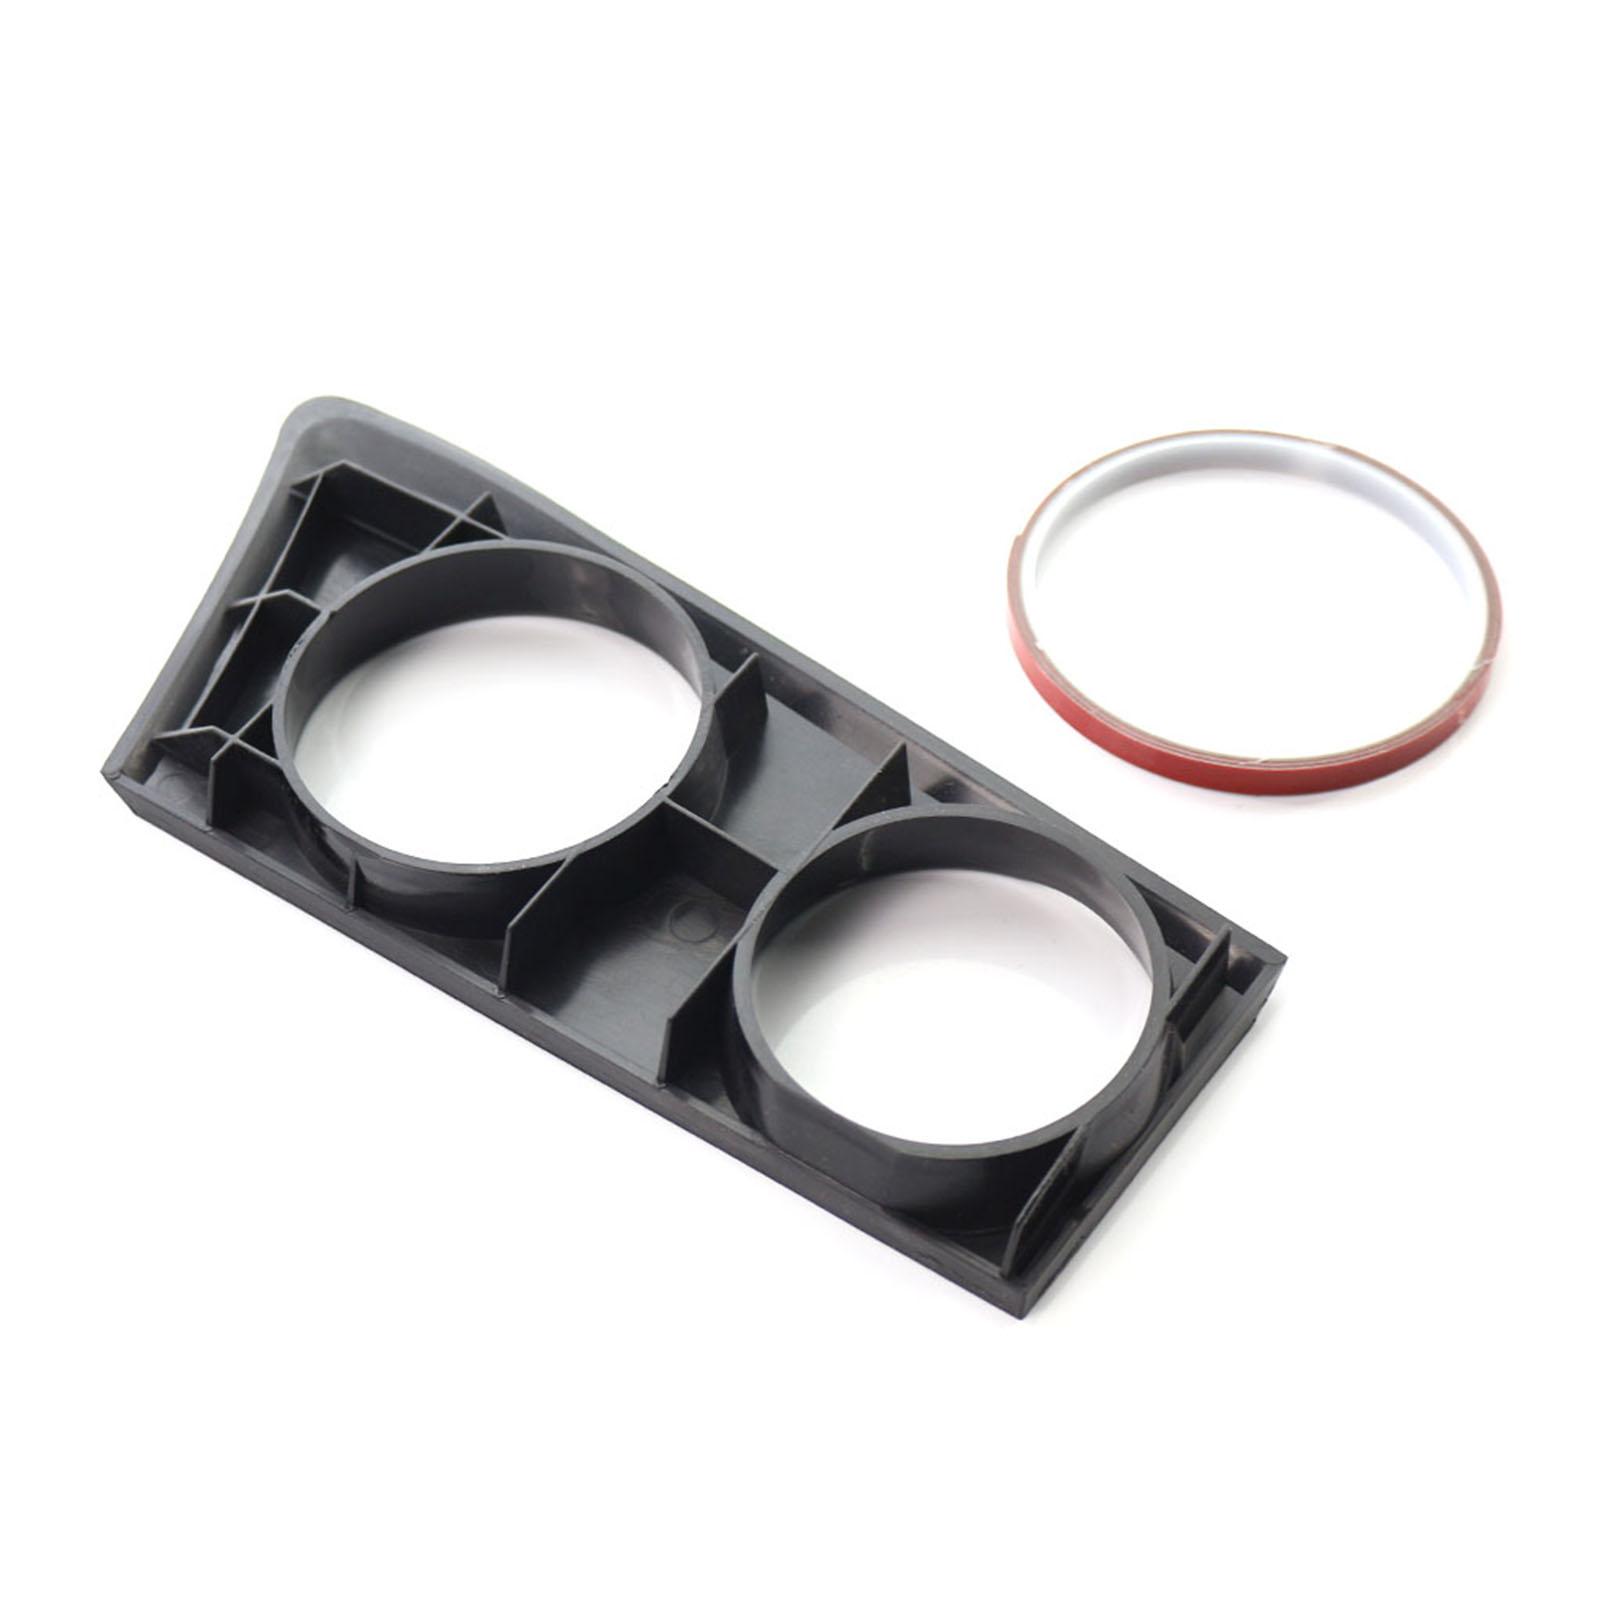 Black Car Front Water Cup Holder Fit for BMW 1 Series E87 04 11 Bright